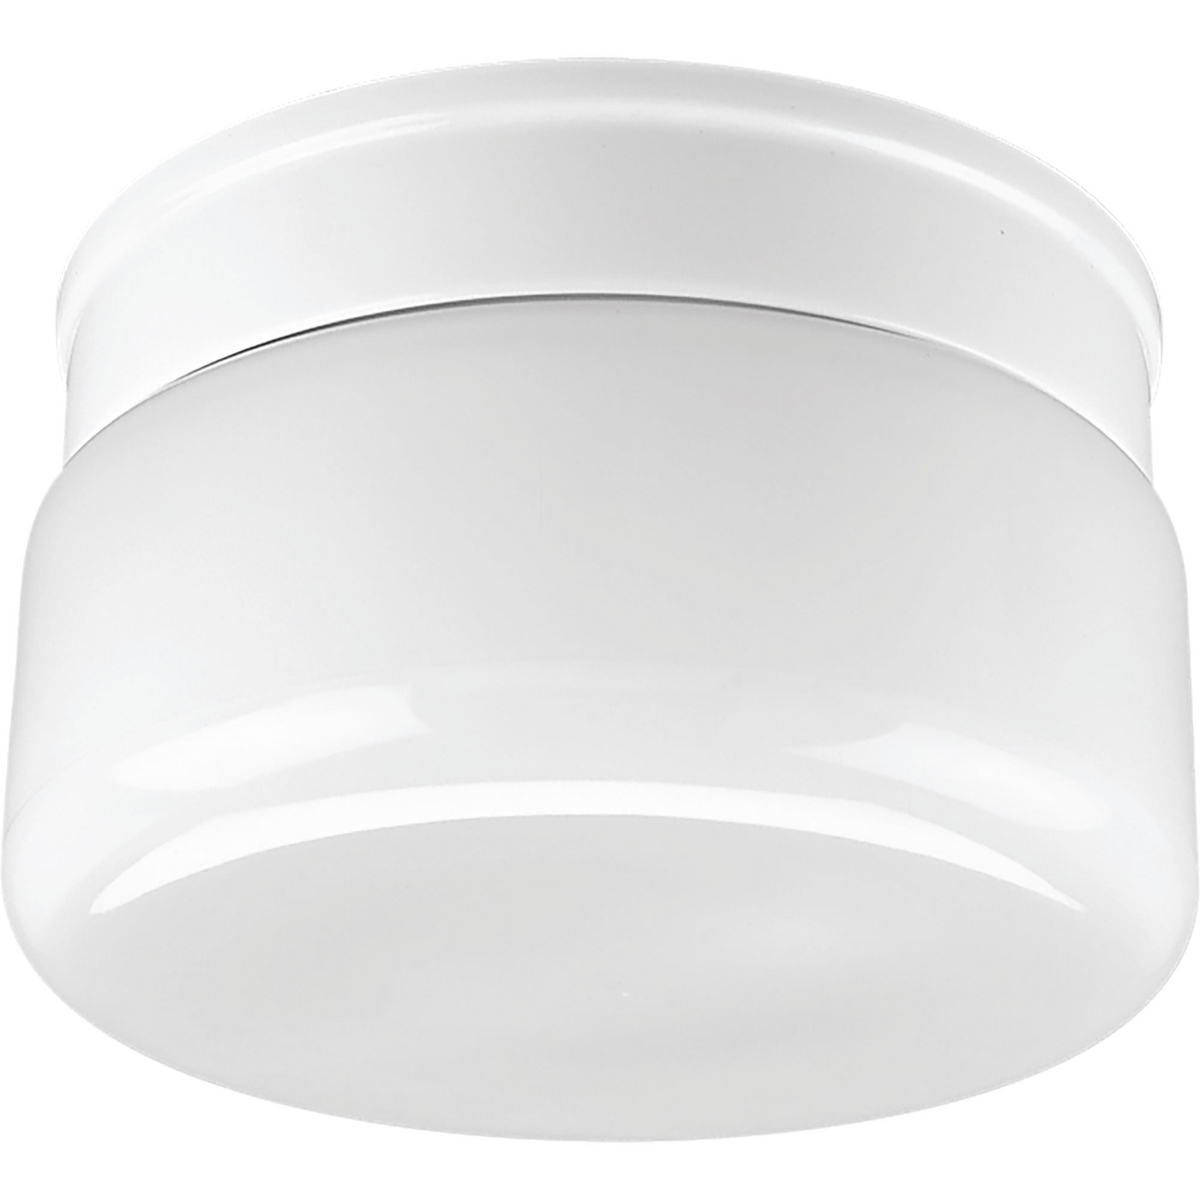 Offering style and convenience, this minimalist two-light close-to-ceiling piece by Progress Lighting is made with a white glass shade with snap-in fitter for easy bulb replacement. The fixture is ideal in a bathroom setting or hall/foyer. The durable construction ensures years of service.